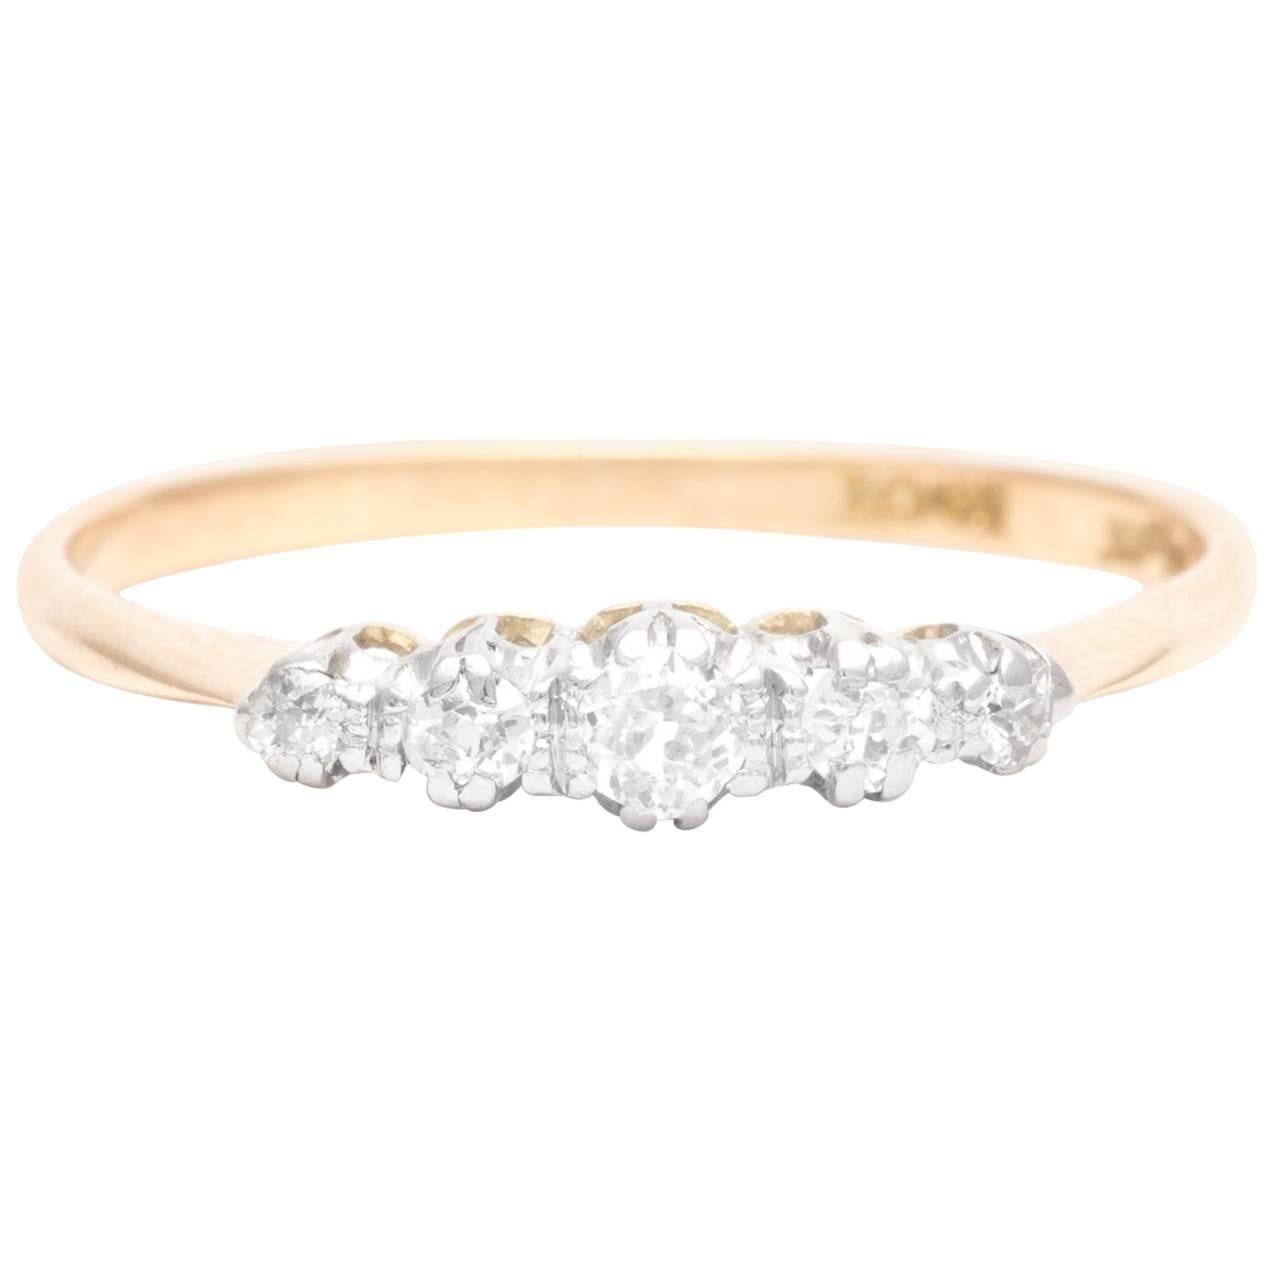 English Diamond Wedding Band in Platinum and Yellow Gold For Sale